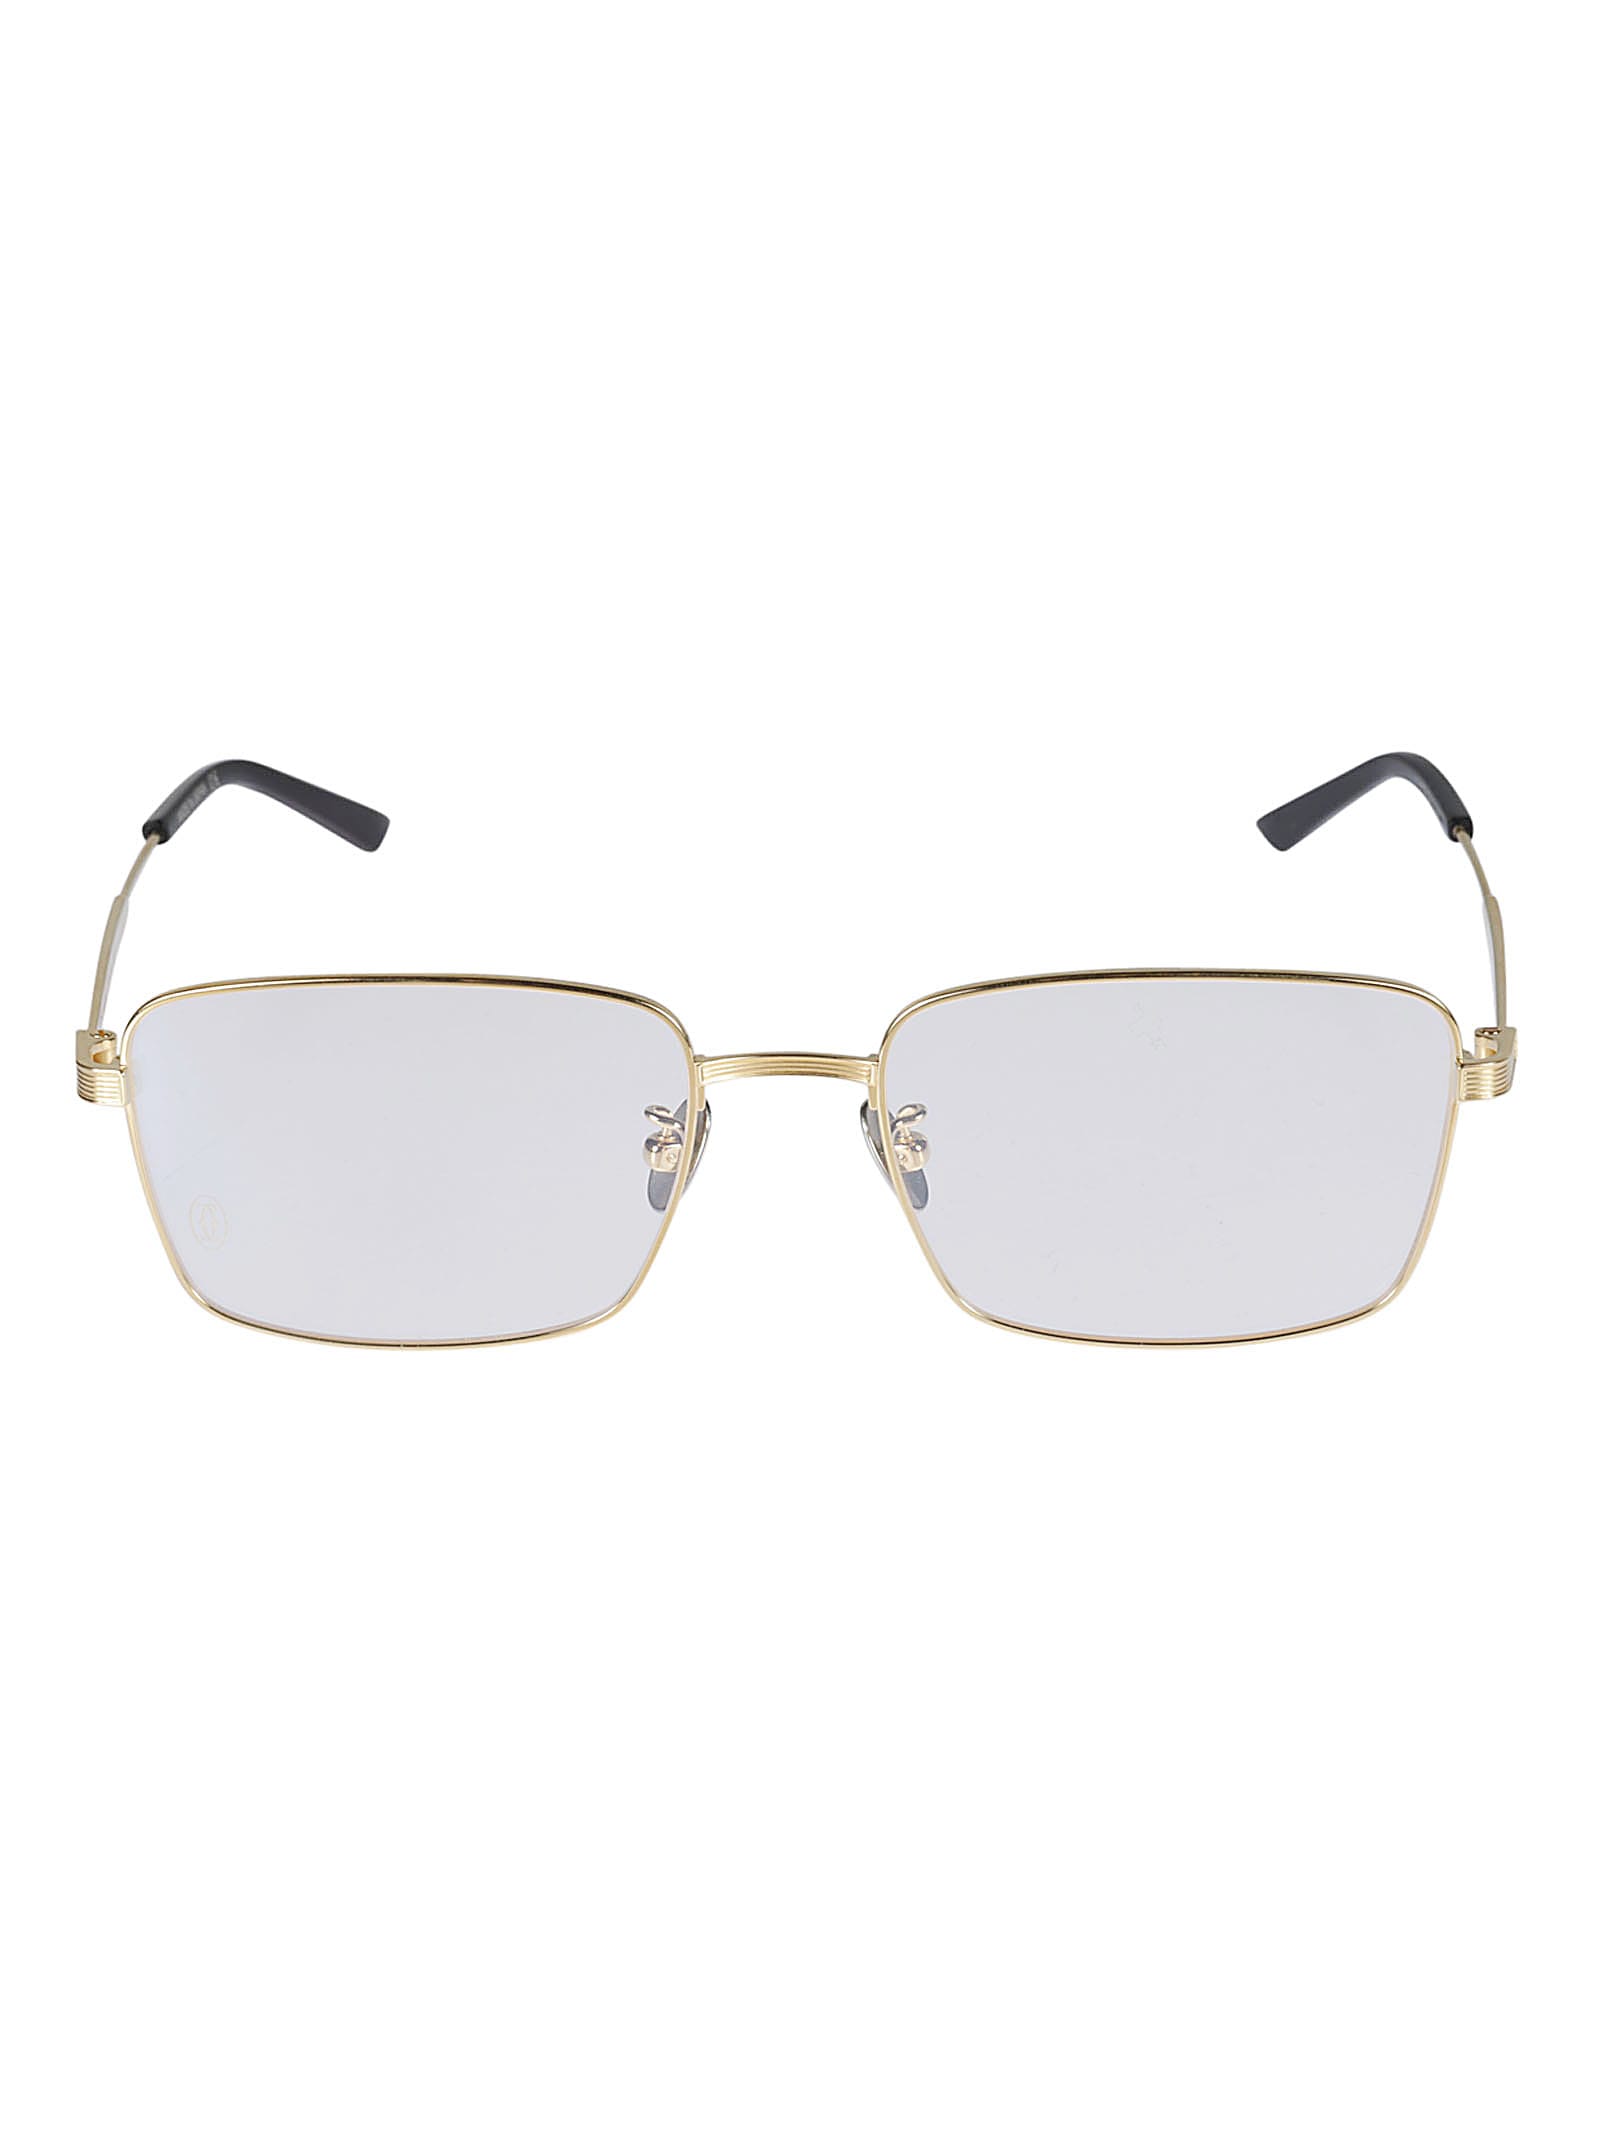 Cartier Optical Frame Genuine Glasses In Gold